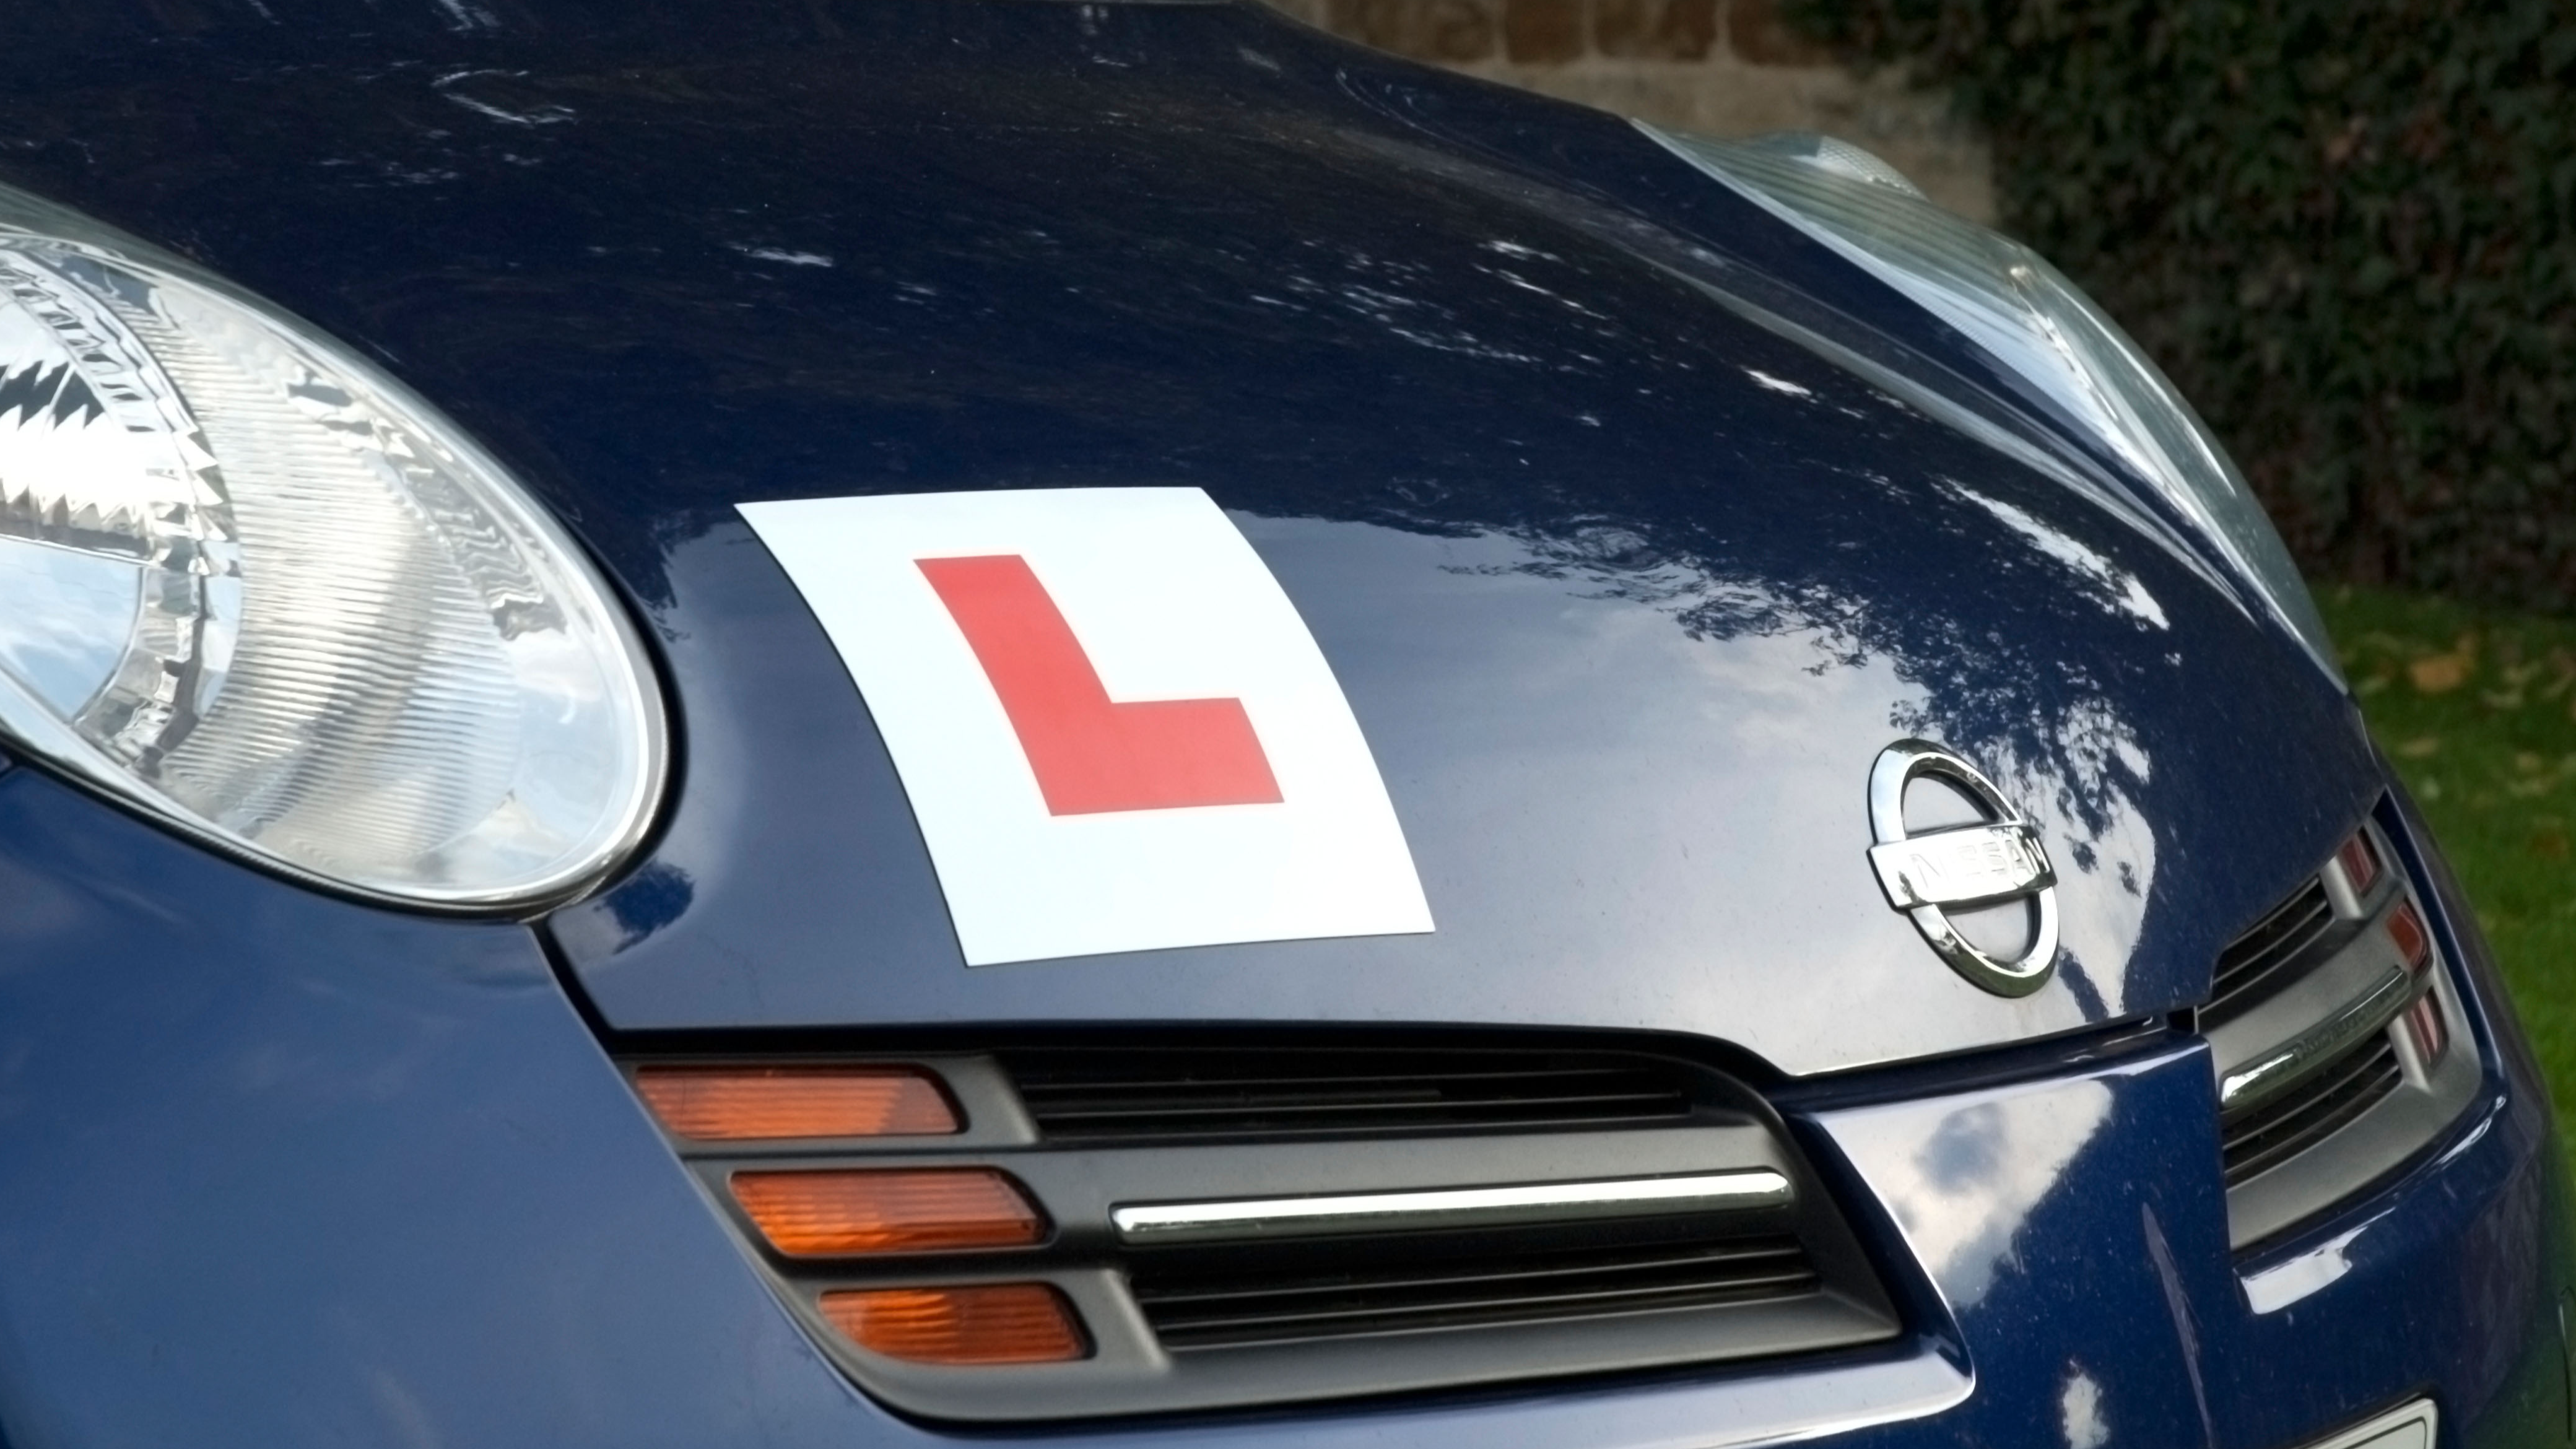 Woman Travelled 500 Miles To Take 'Easiest' Driving Test But Failed